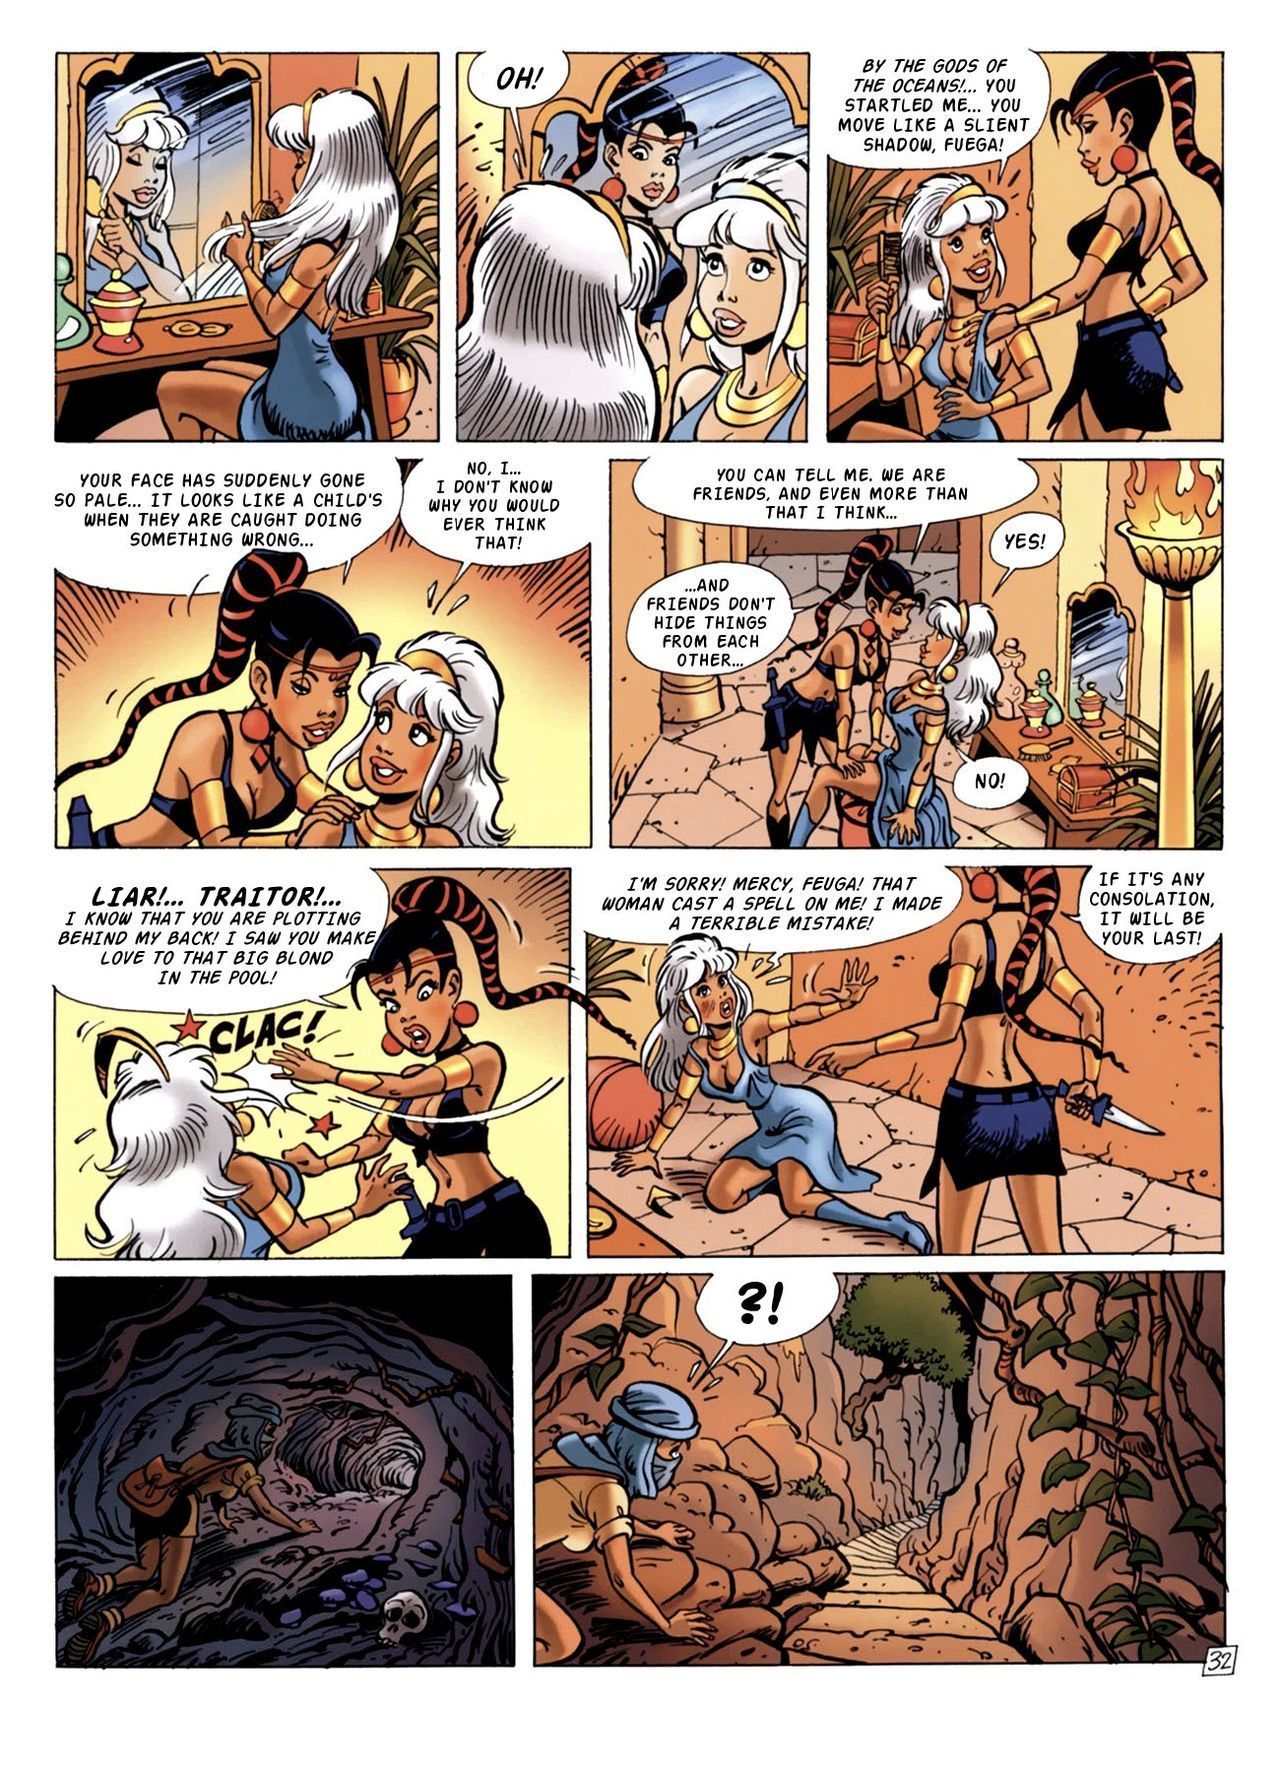 Di Sano A Real Woman 4 - Johanna- Lady of the Sands - part 2